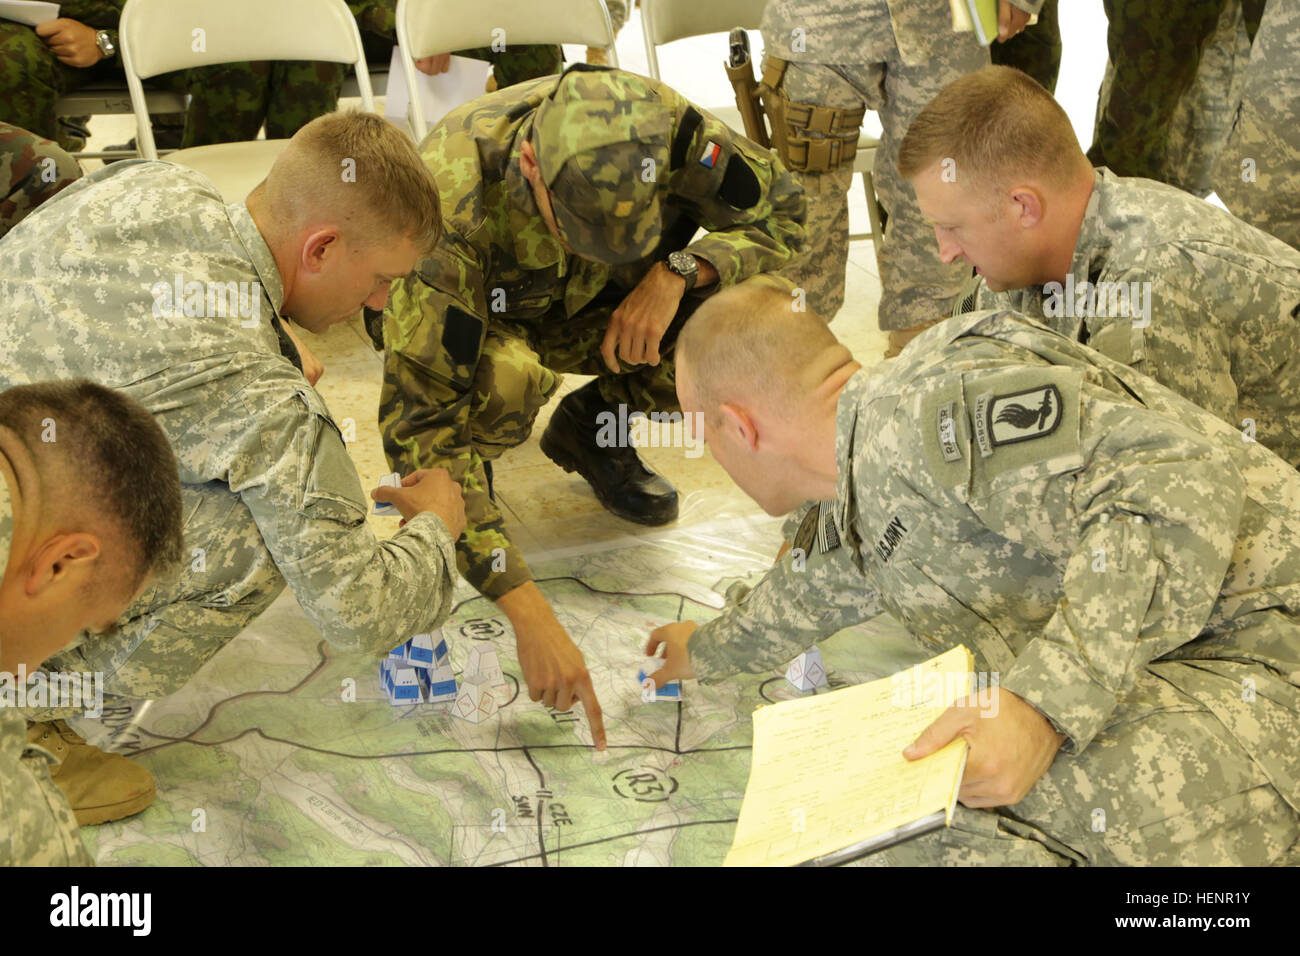 U.S. Soldiers of 1st Battalion, 503rd Infantry Regiment, 173rd Airborne Brigade and a Czech soldier place unit tokens on a map during training exercise Saber Junction 2014 at the Joint Multinational Readiness Center in Hohenfels, Germany, Aug. 30, 2014. Saber Junction 2014 prepares U.S., NATO allies and European security partners to conduct unified land operations through the simultaneous combination of offensive, defensive and stability operations appropriate to the mission and the environment. More information about Saber Junction 2014 can be found at http://www.eur.army.mil/SaberJunction/.  Stock Photo